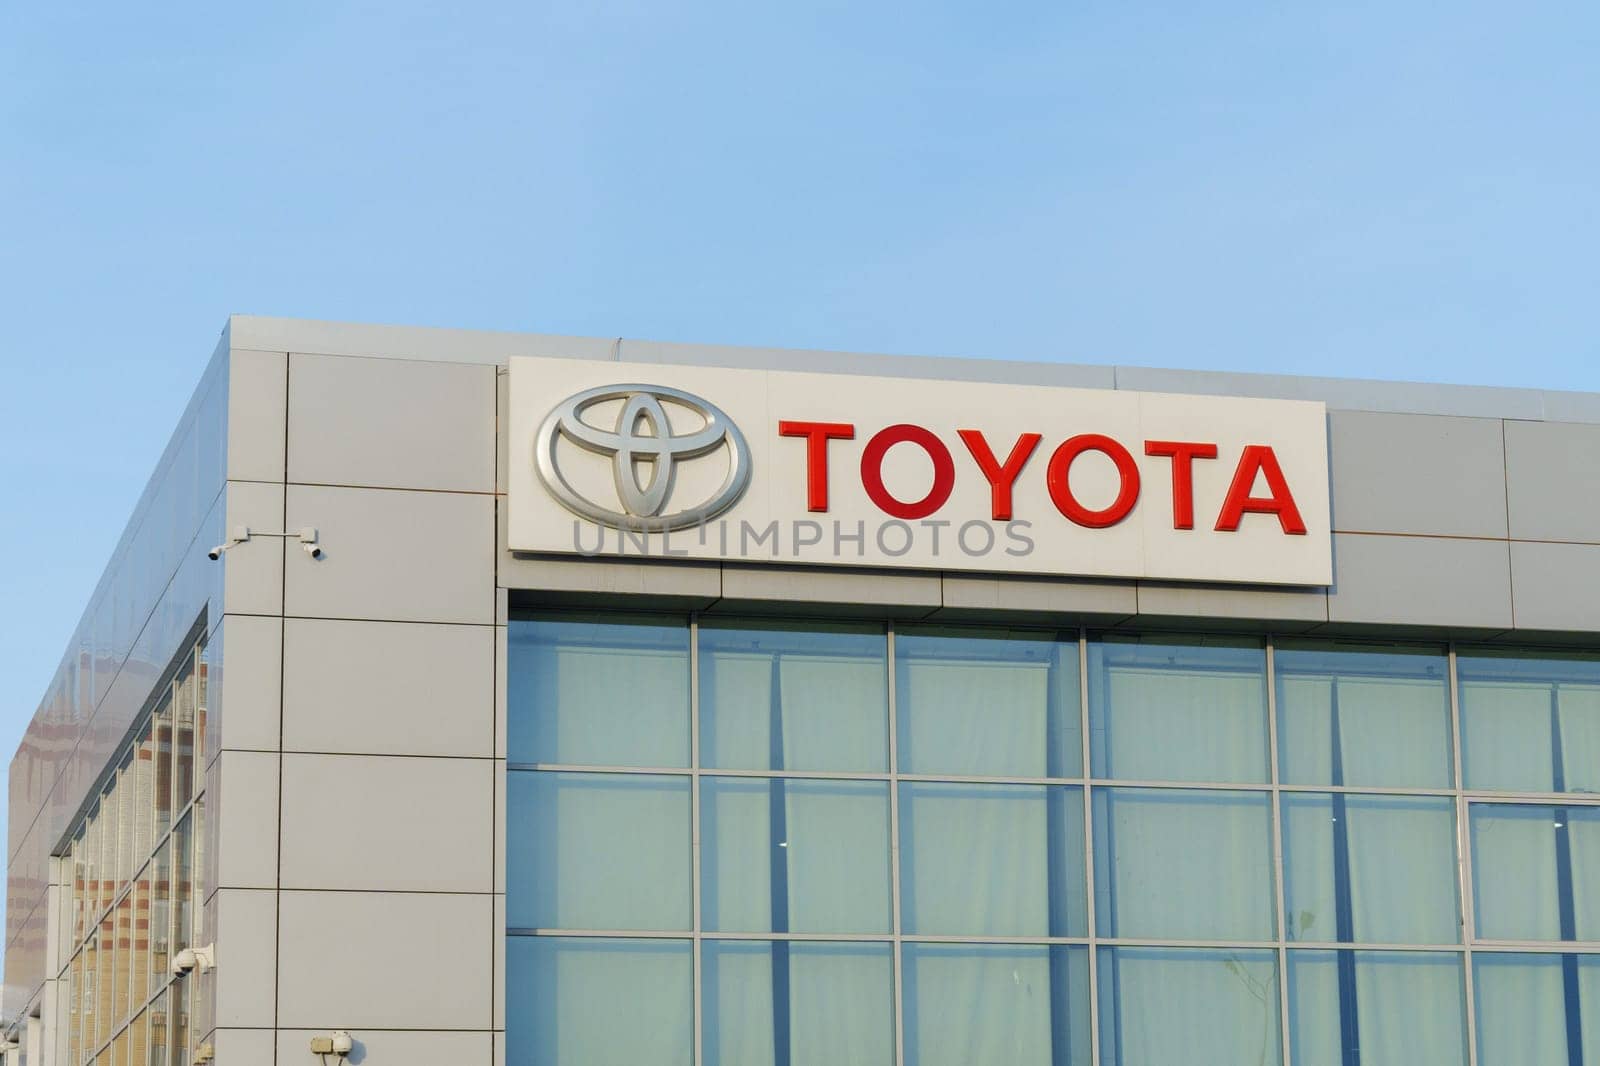 Tyumen, Russia-March 02, 2024: Toyota brand logo sign prominently displayed on the side of a commercial building in a city.